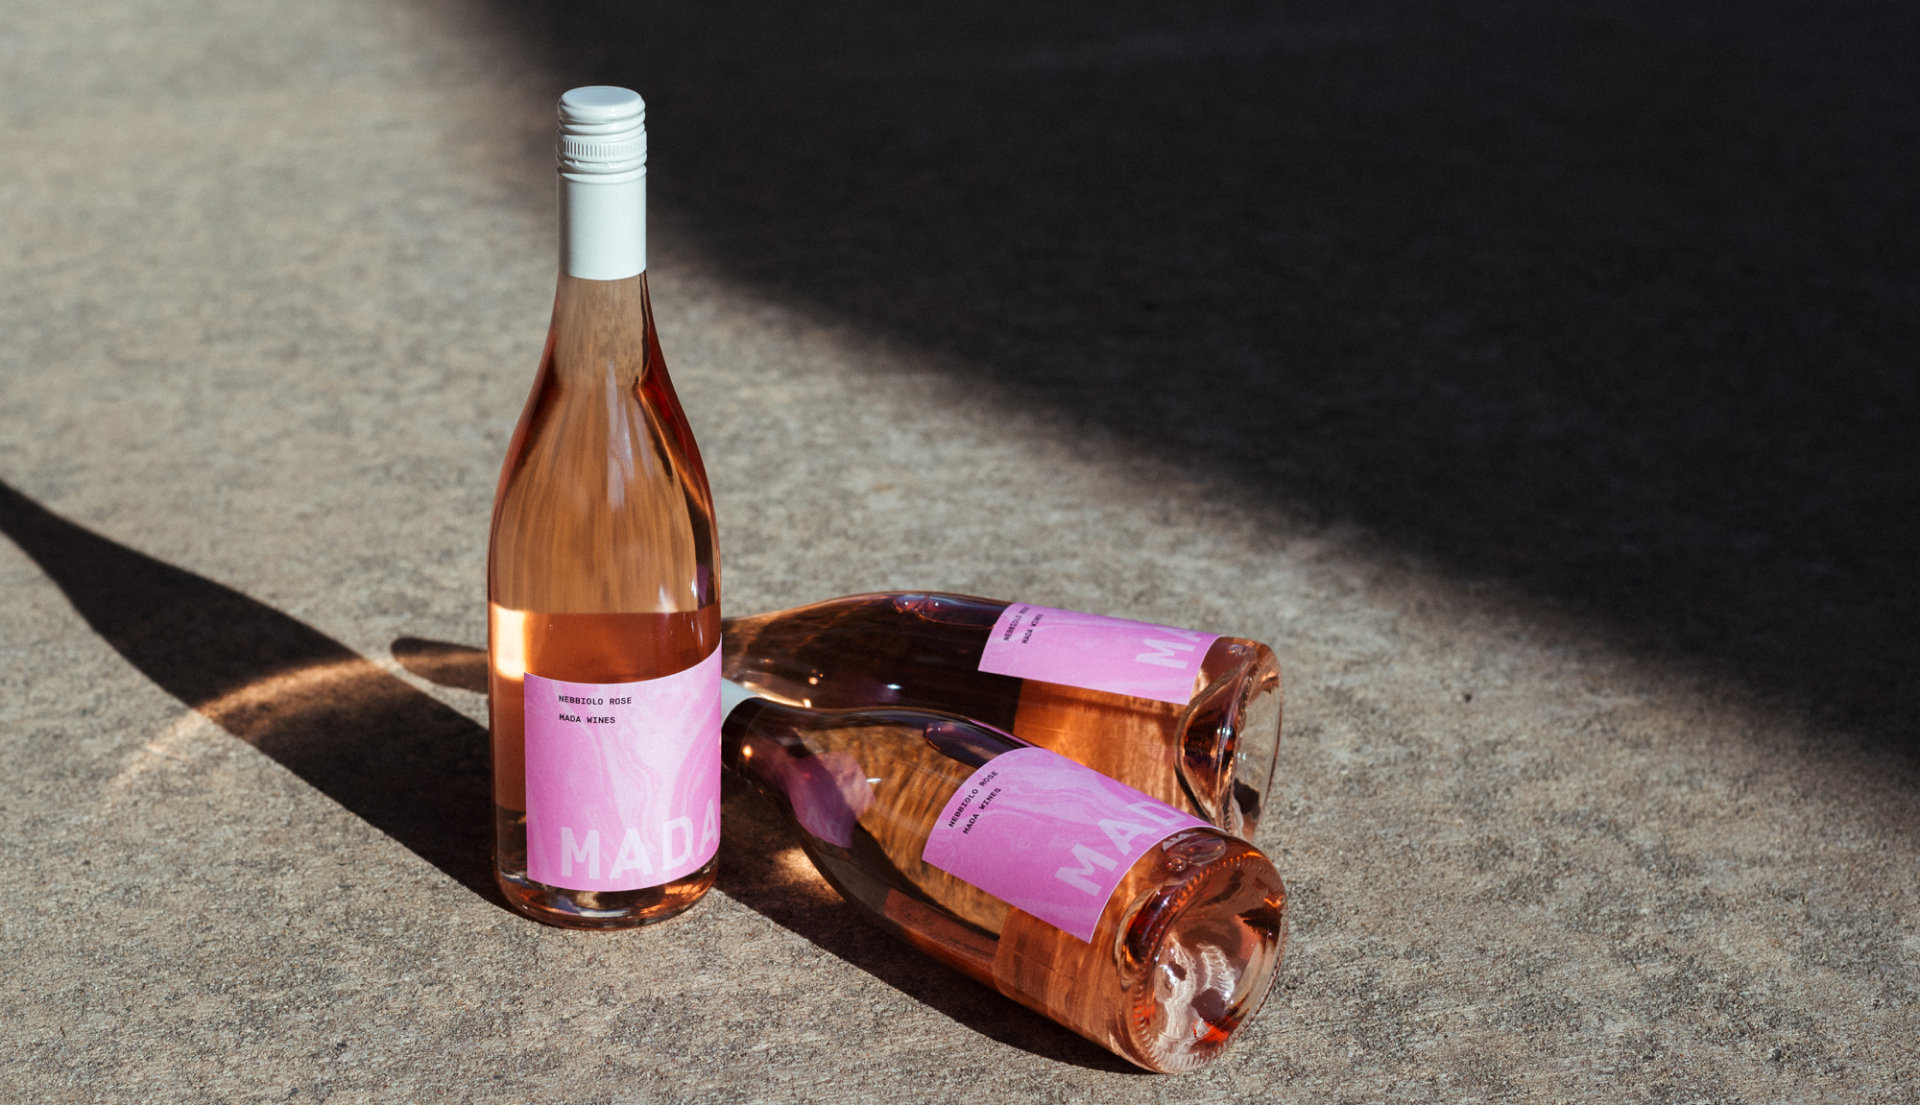 Three rose bottles on concrete ground. Sun is casting long shadows and light is shining through pink glass. Two bottles are lying on their sides, one bottle is standing upright.